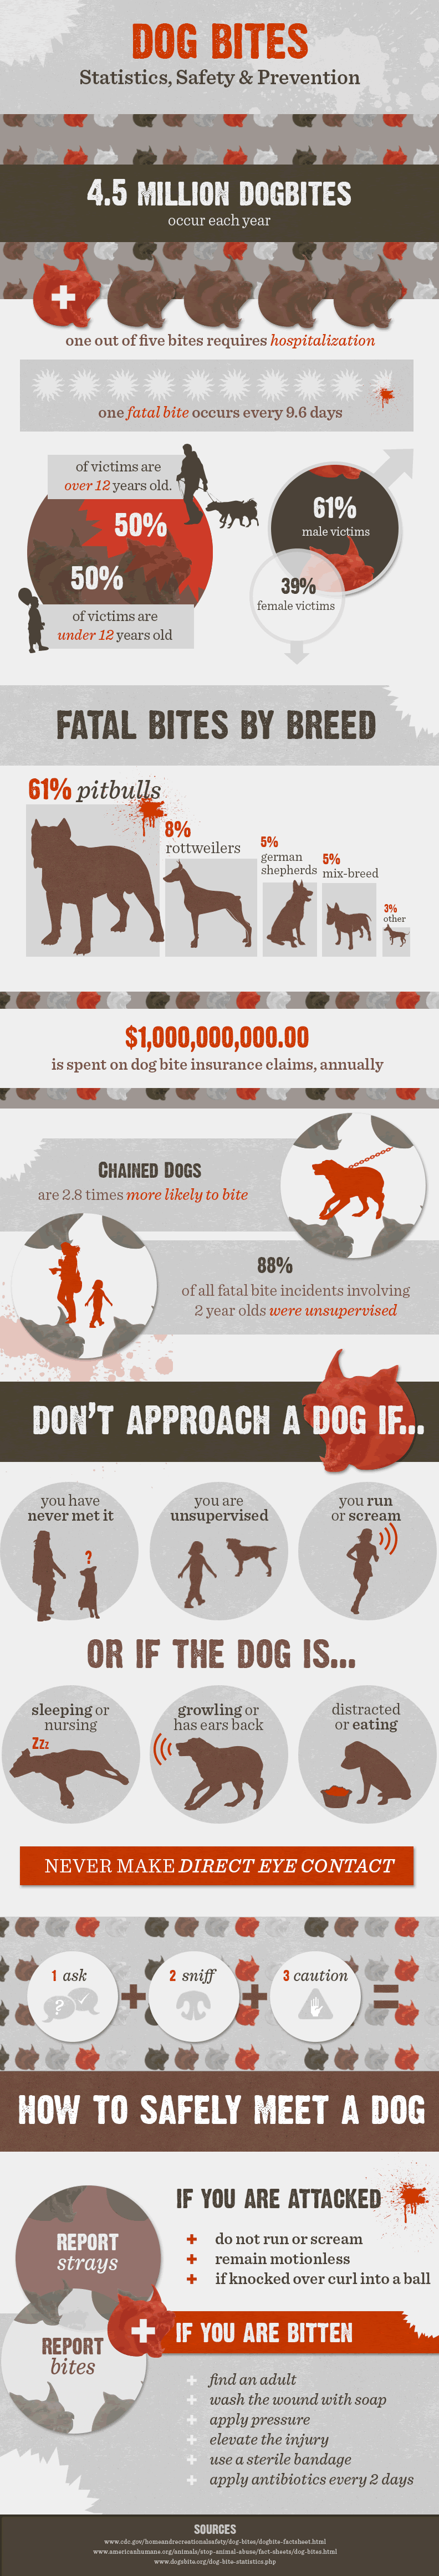 Dog Bite Statistics and Safety Infographic